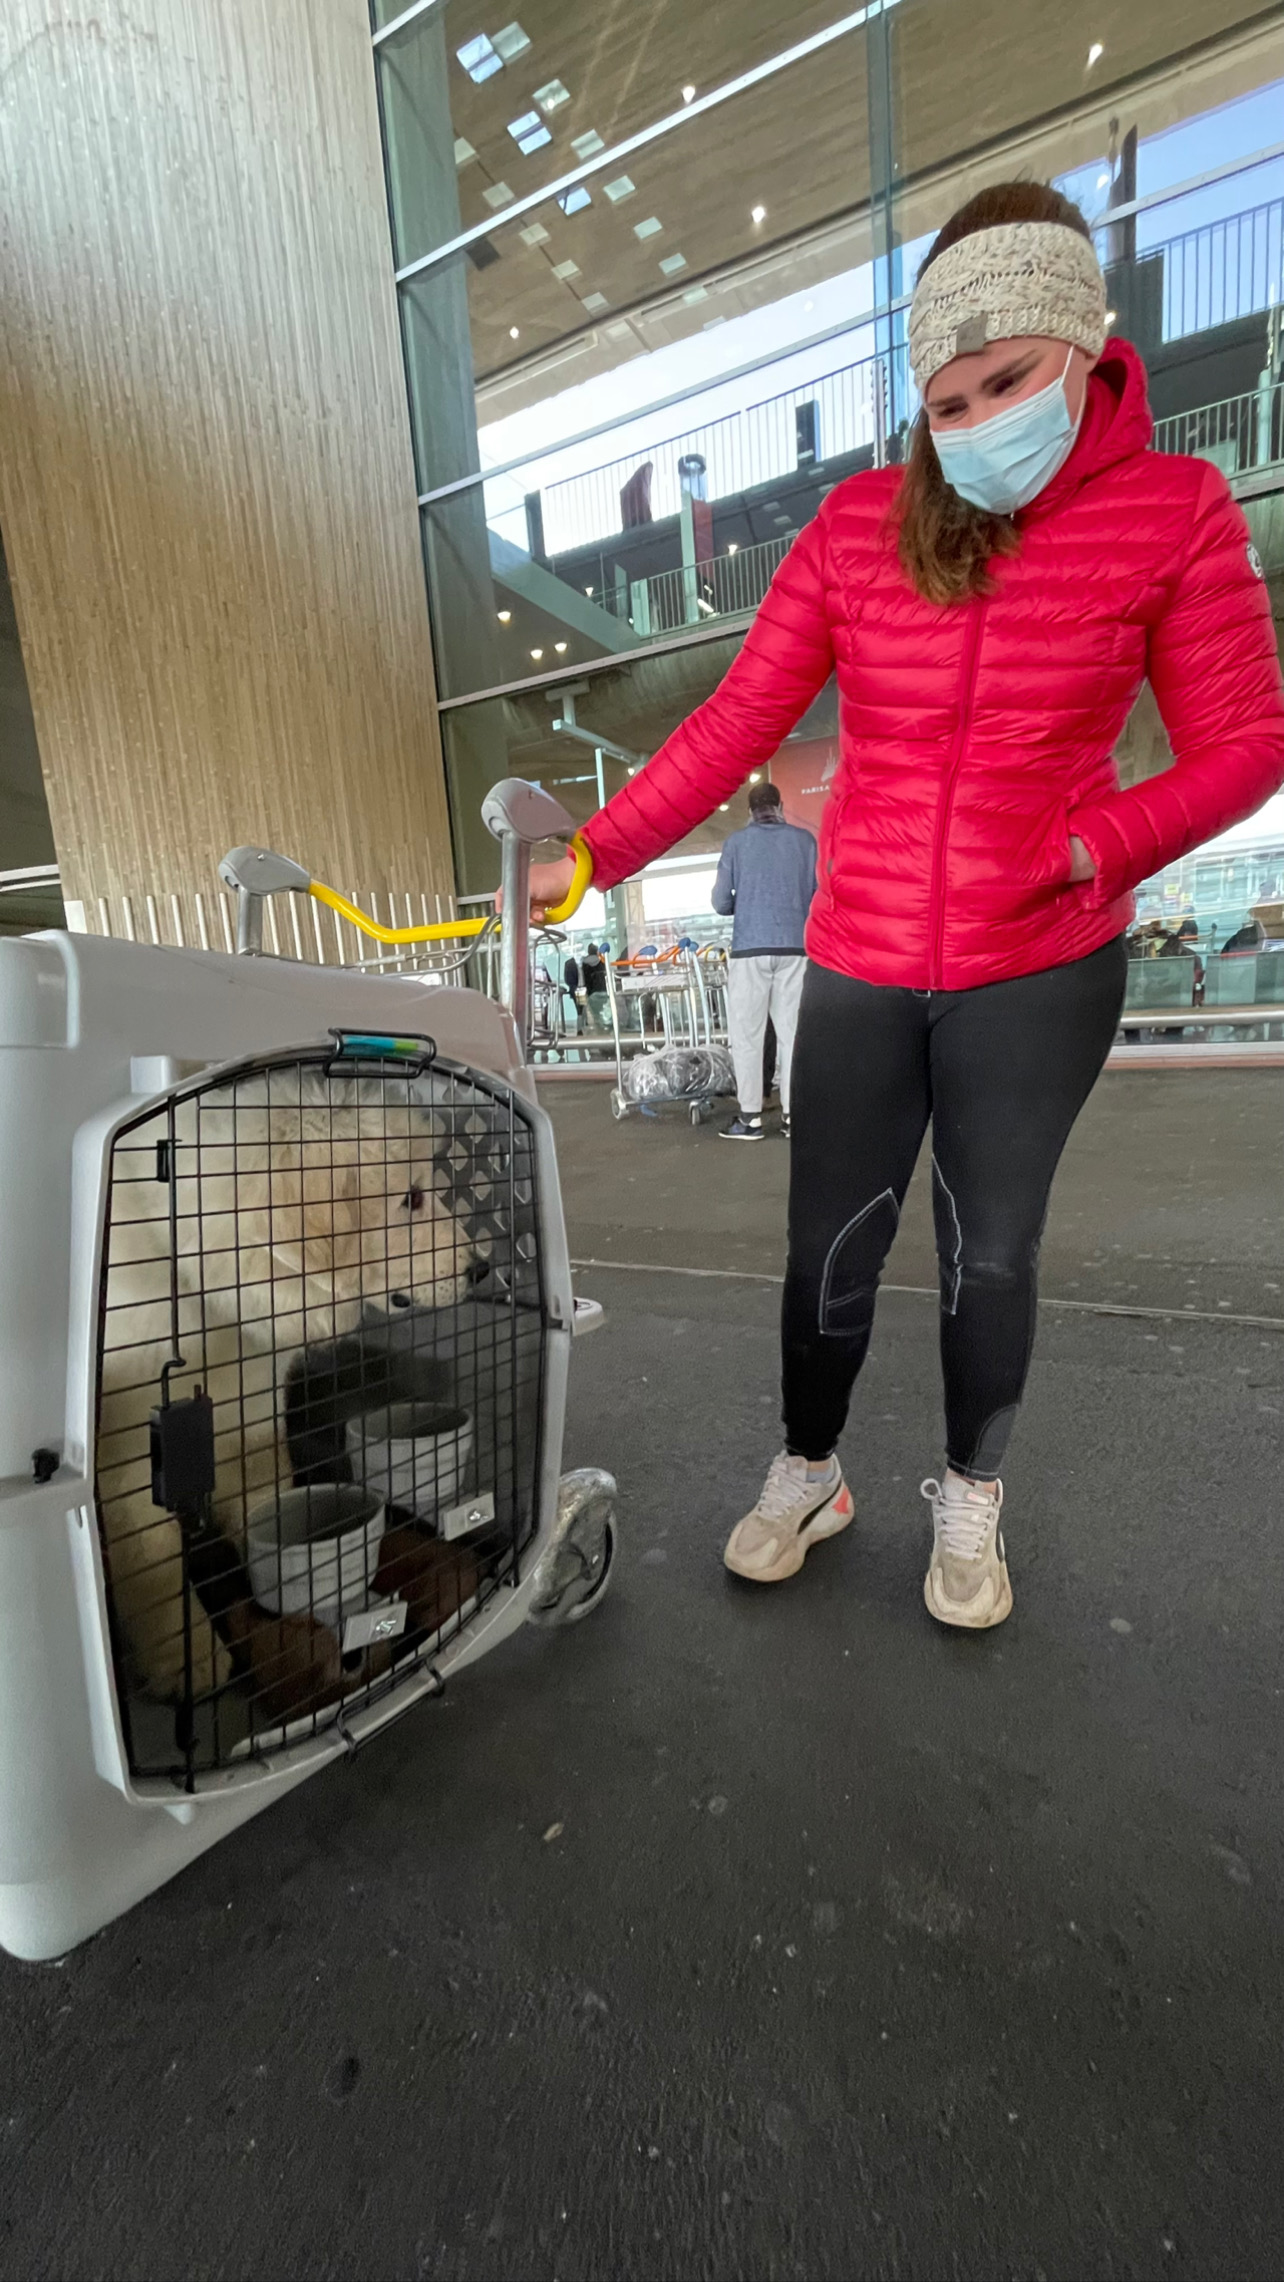 Flight Pet Nanny transporting a Pyrenean Mountain Dog from Boston, MA to Paris, France